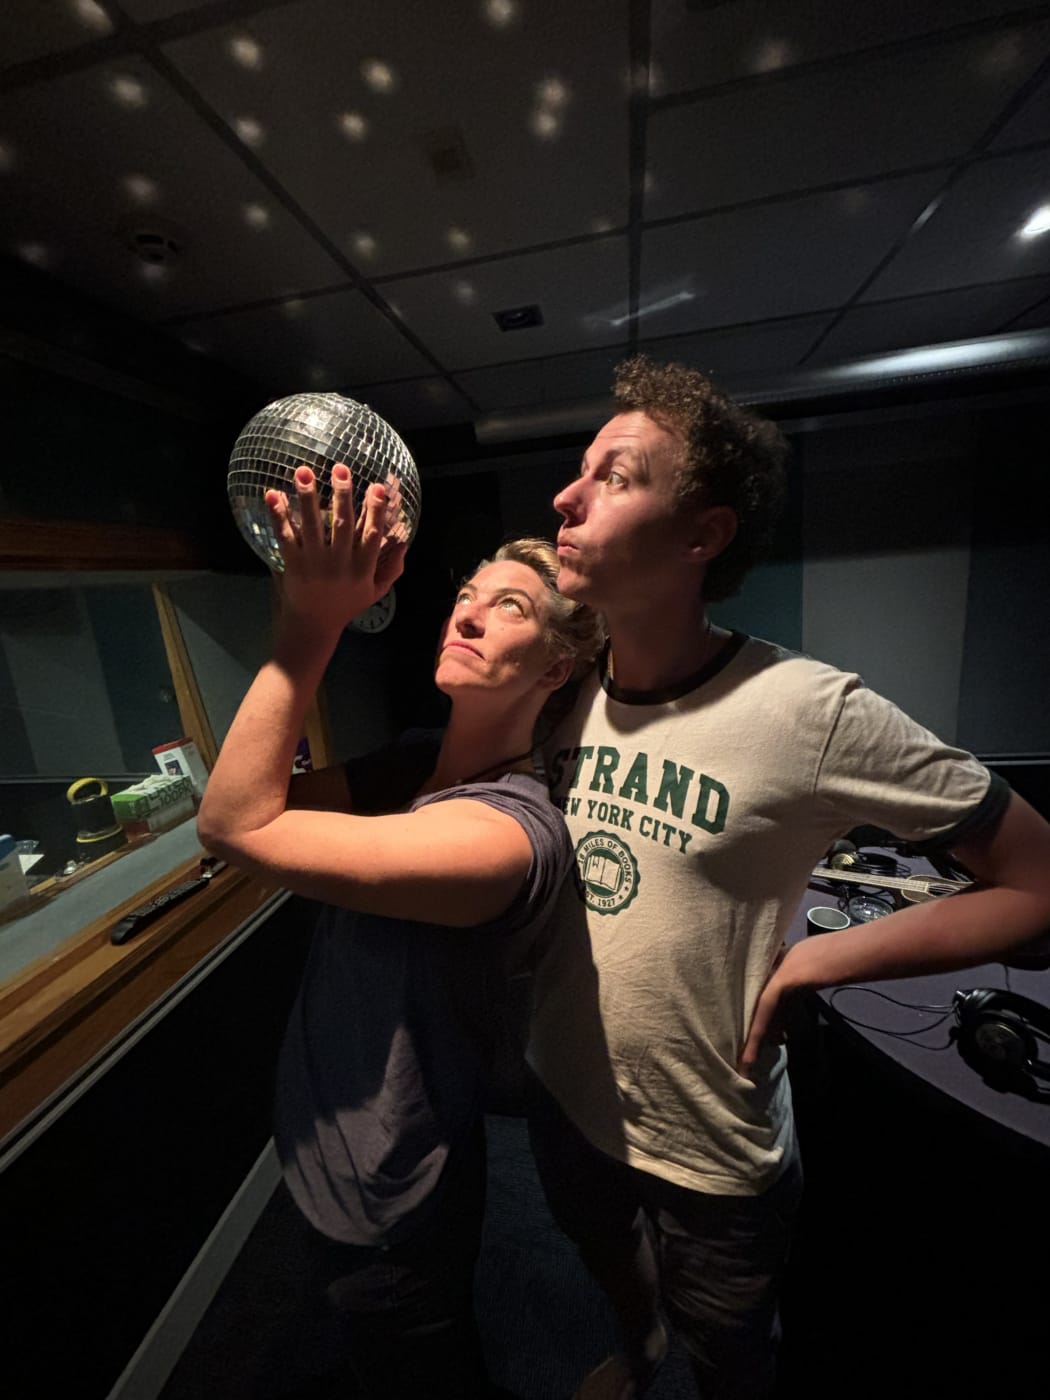 Amanda and Emile look reverently at a held disco ball, which casts light around the RNZ studio they're standing in.